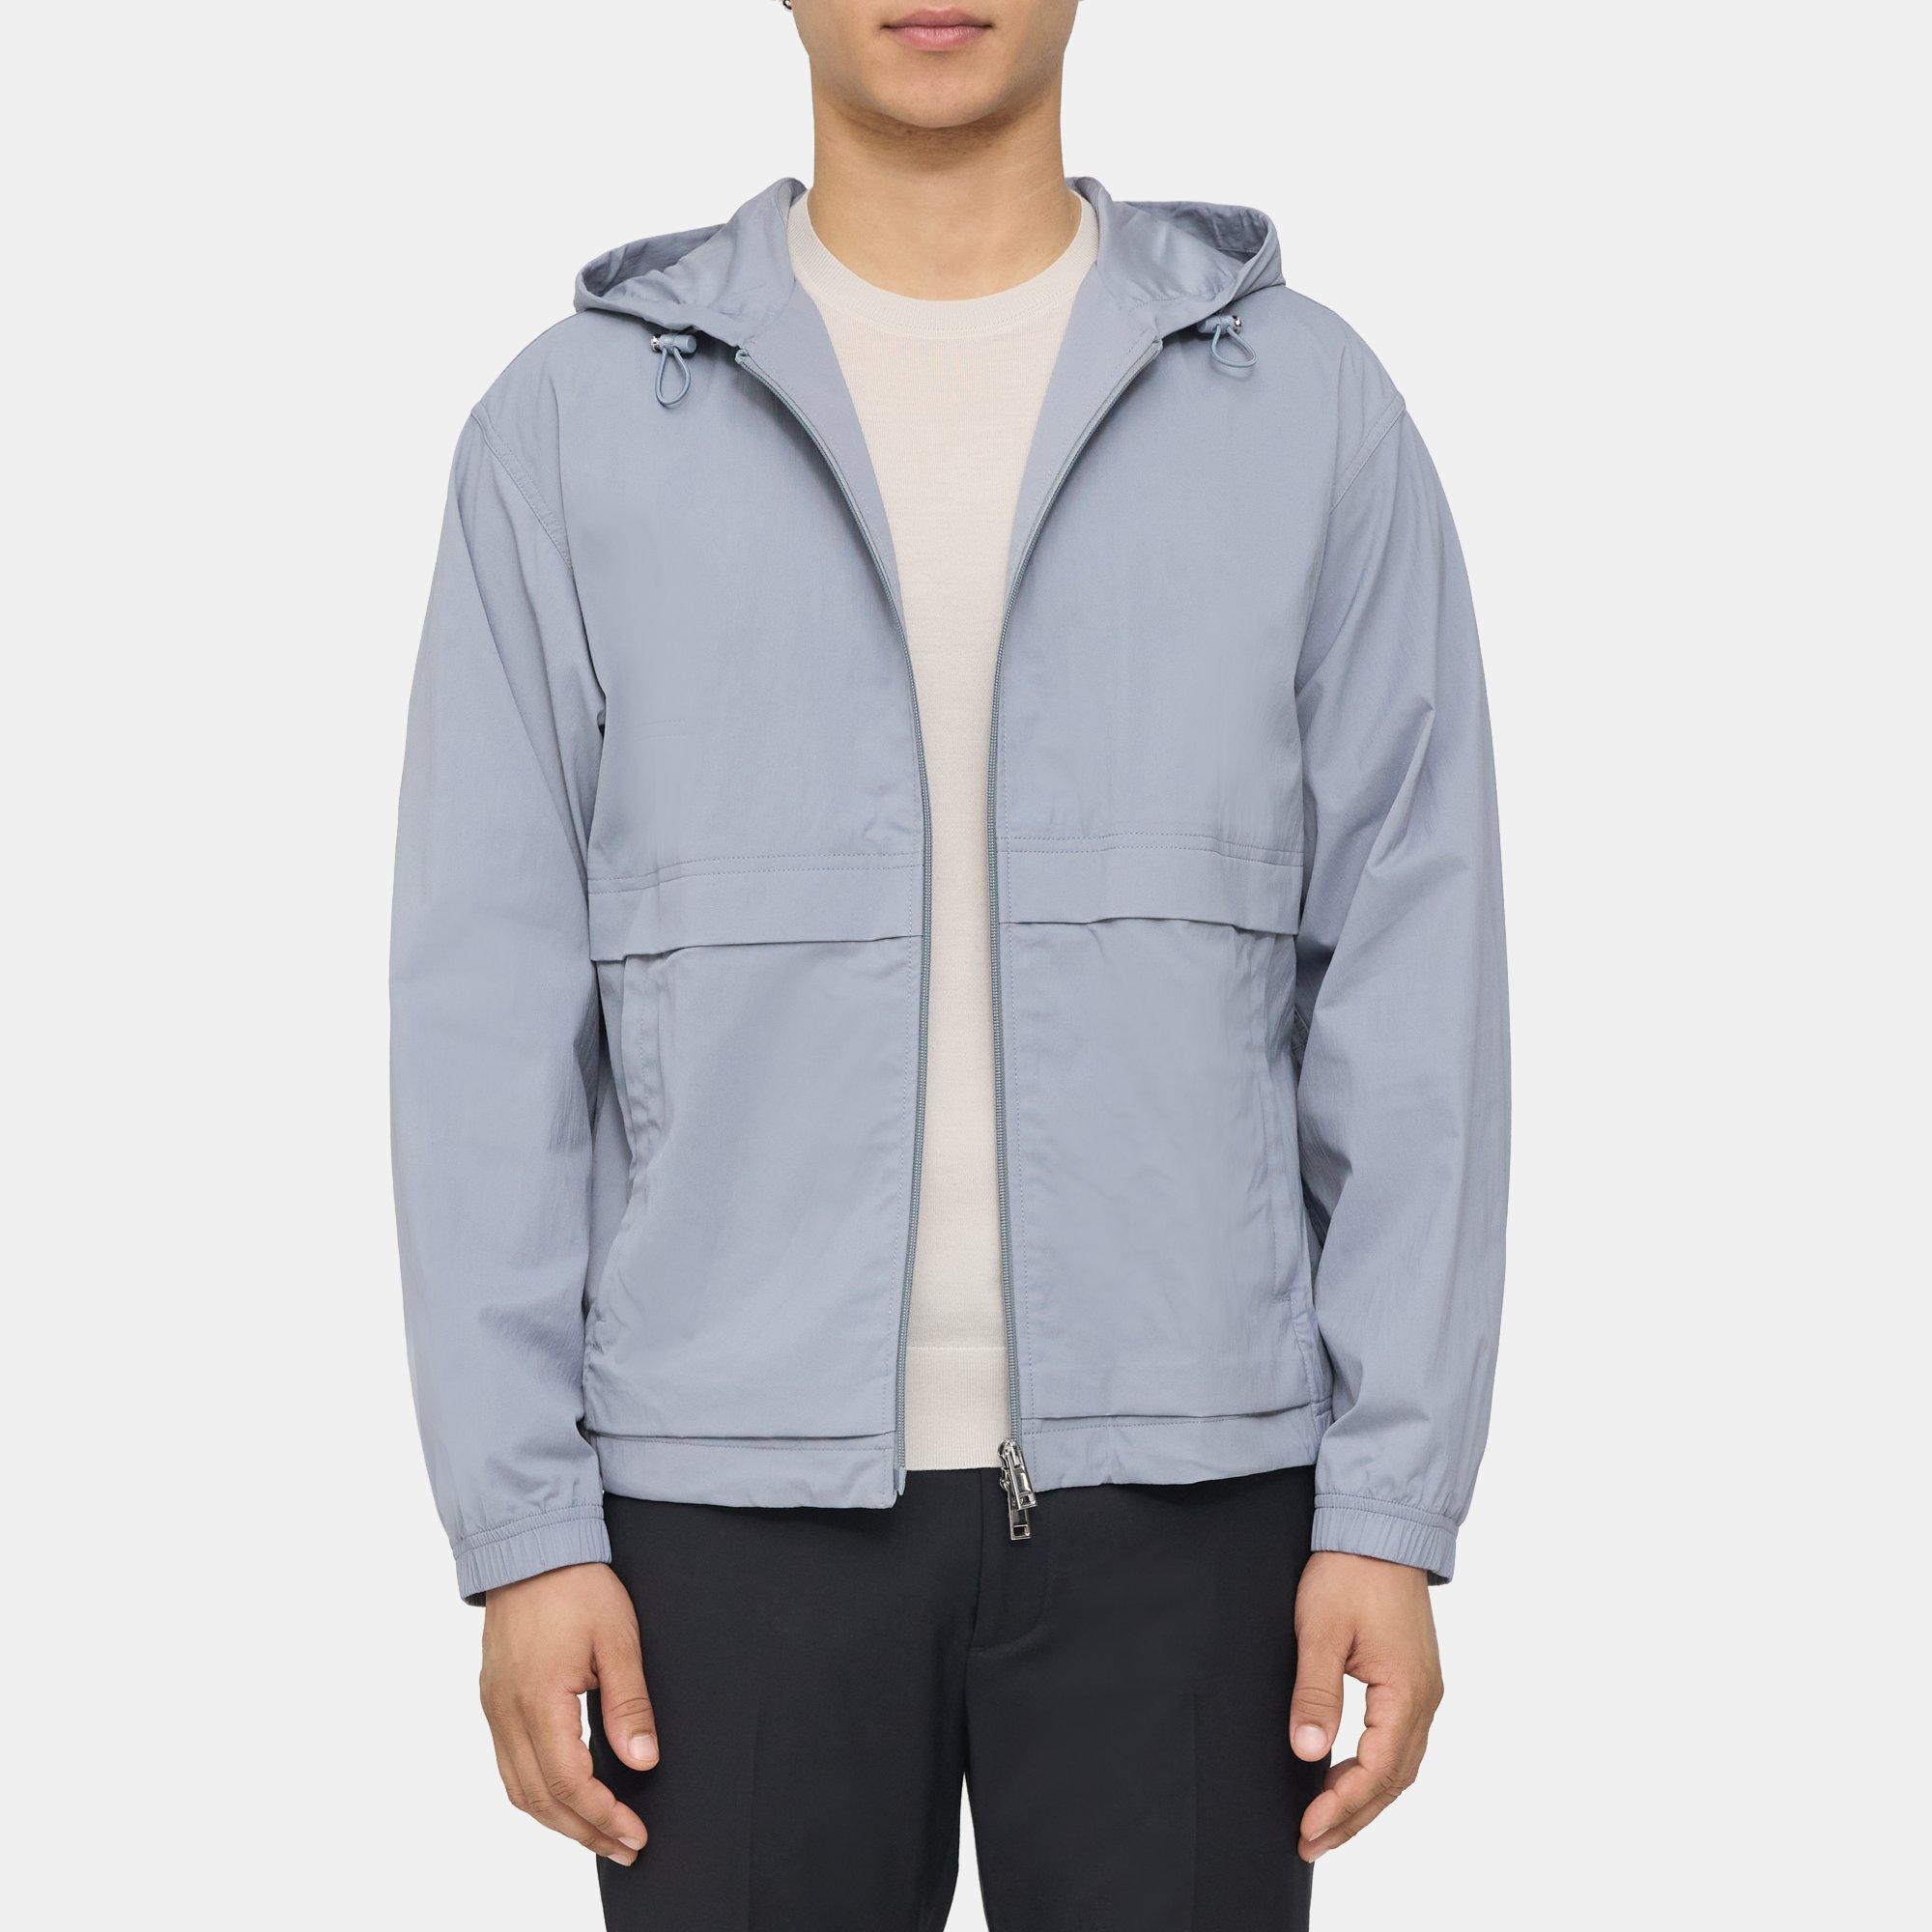 Theory Hooded Jacket in Pique Nylon